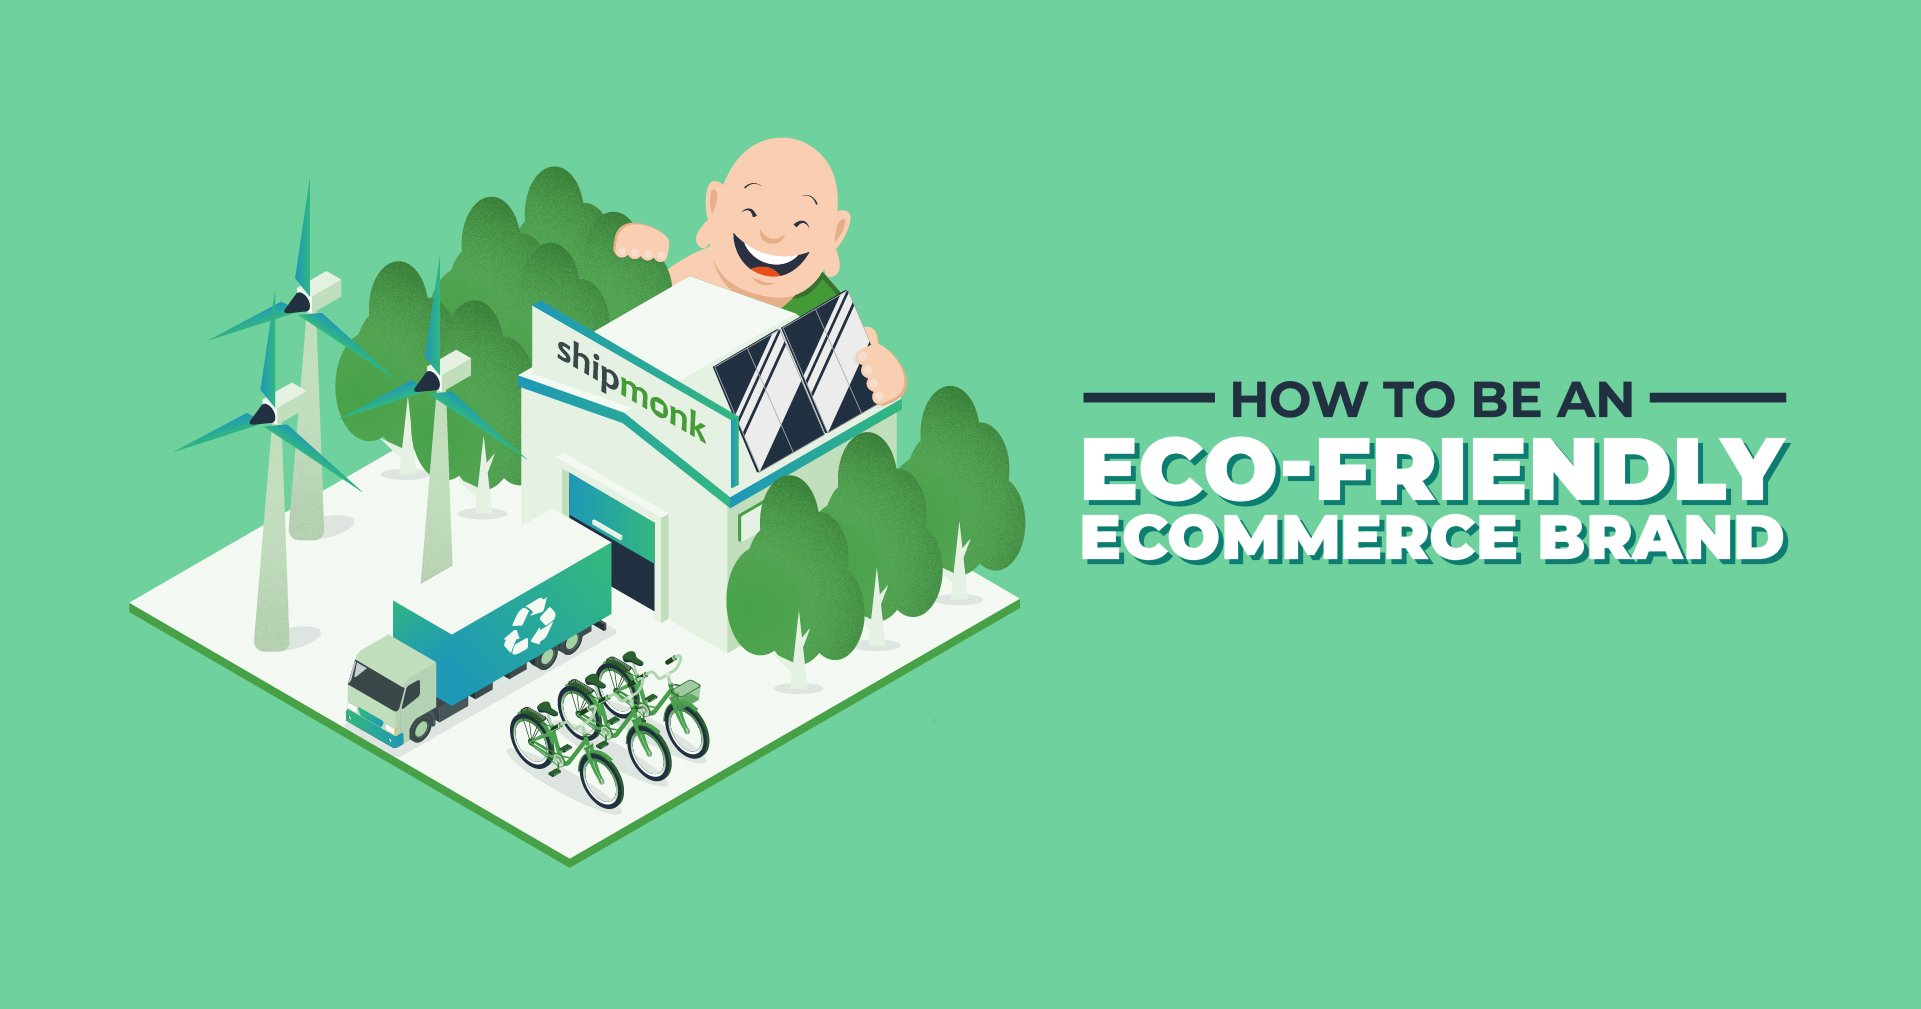 How to be an Eco-Friendly Ecommerce Brand